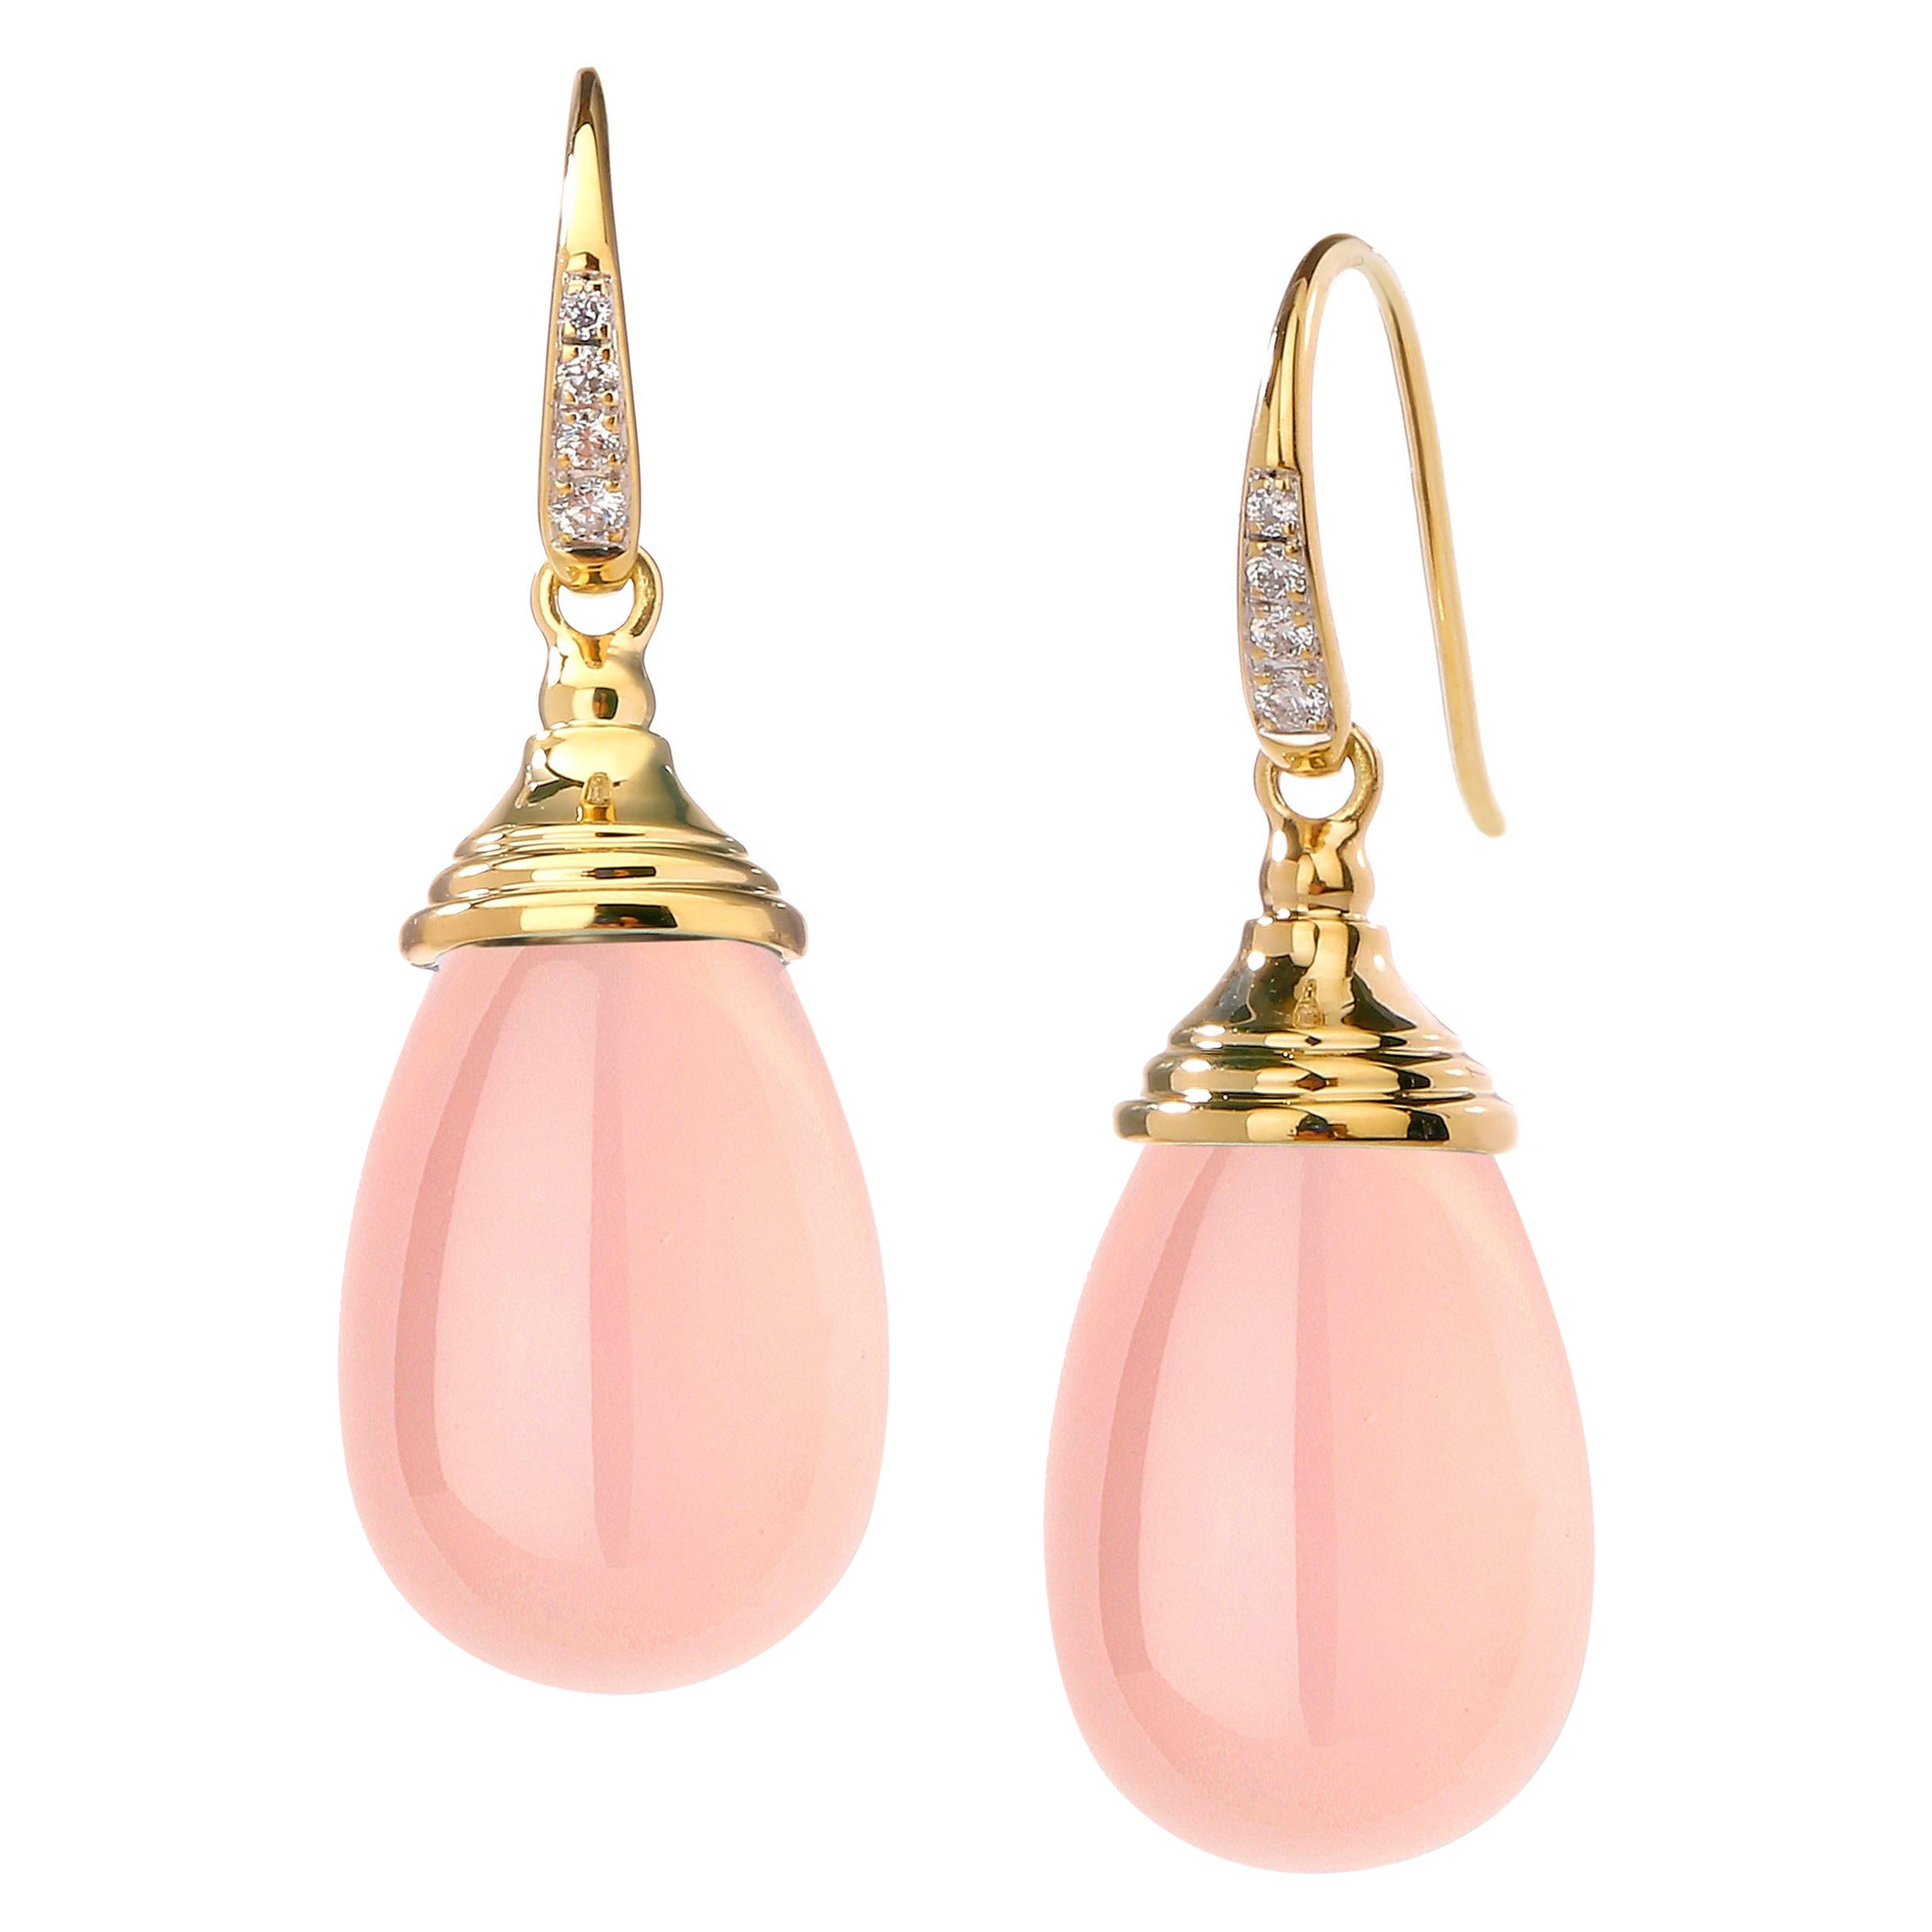 Syna Yellow Gold Rose Quartz Drop Earrings with Diamonds